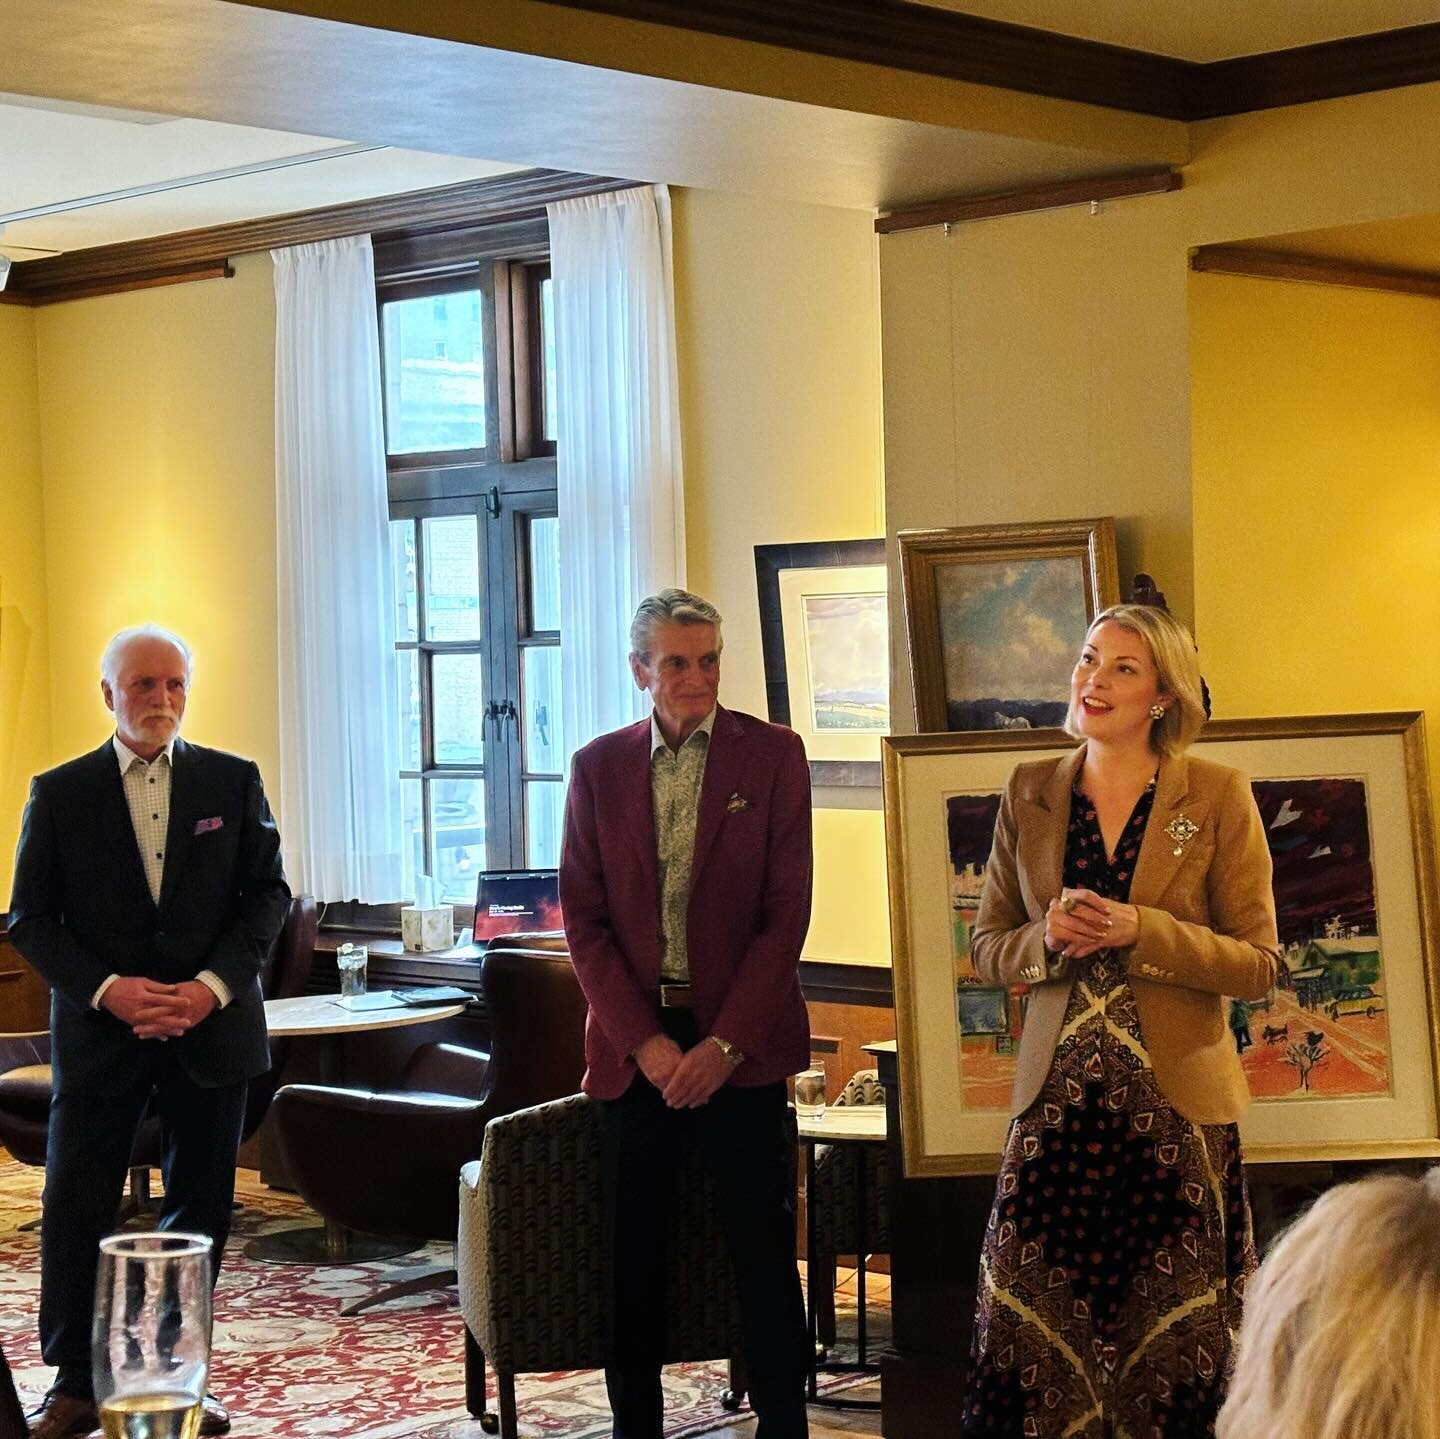 HERITAGE AND ART // As a member of the Ranchmen&rsquo;s Club, I hosted a women and wine event with special guests Jim McLeod and Rod Green to share the stories of our art collection, followed by a dinner. Two important parts of the Club are Canadian 